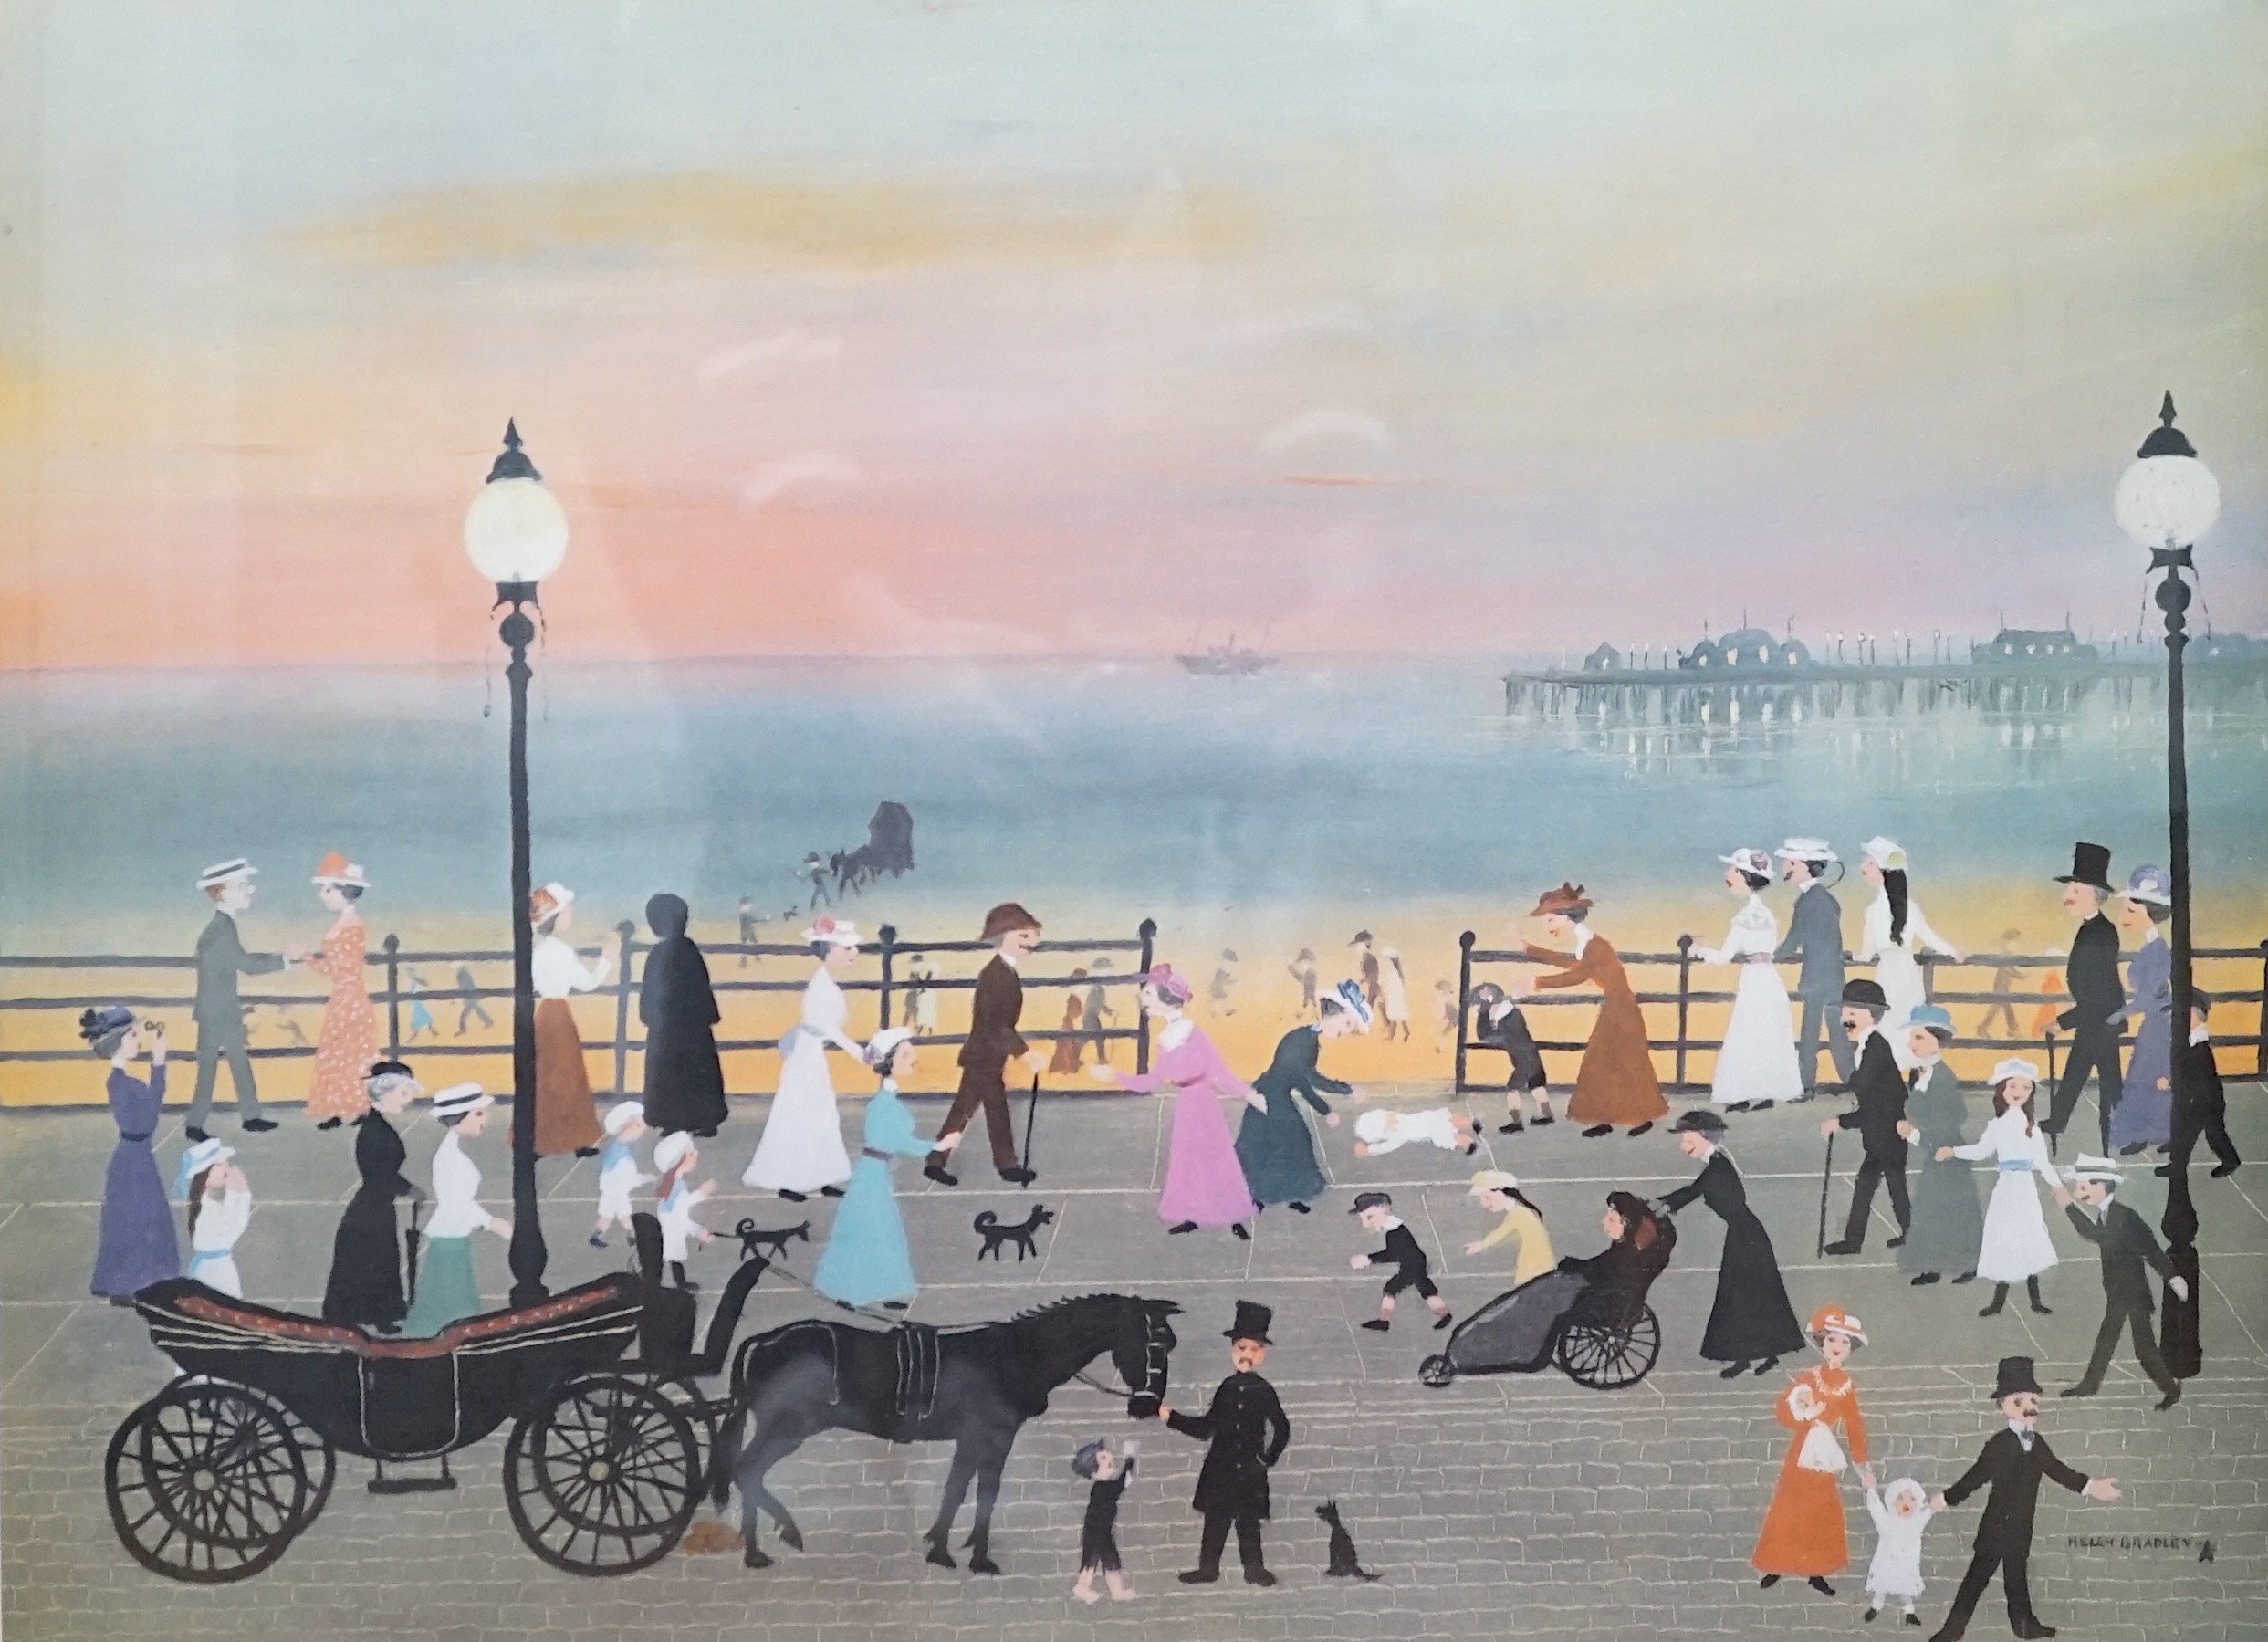 Helen Bradley (1900-1979), limited edition print, 'Evening on the promenade, Blackpool Sands, signed in pencil, 45 x 60cm